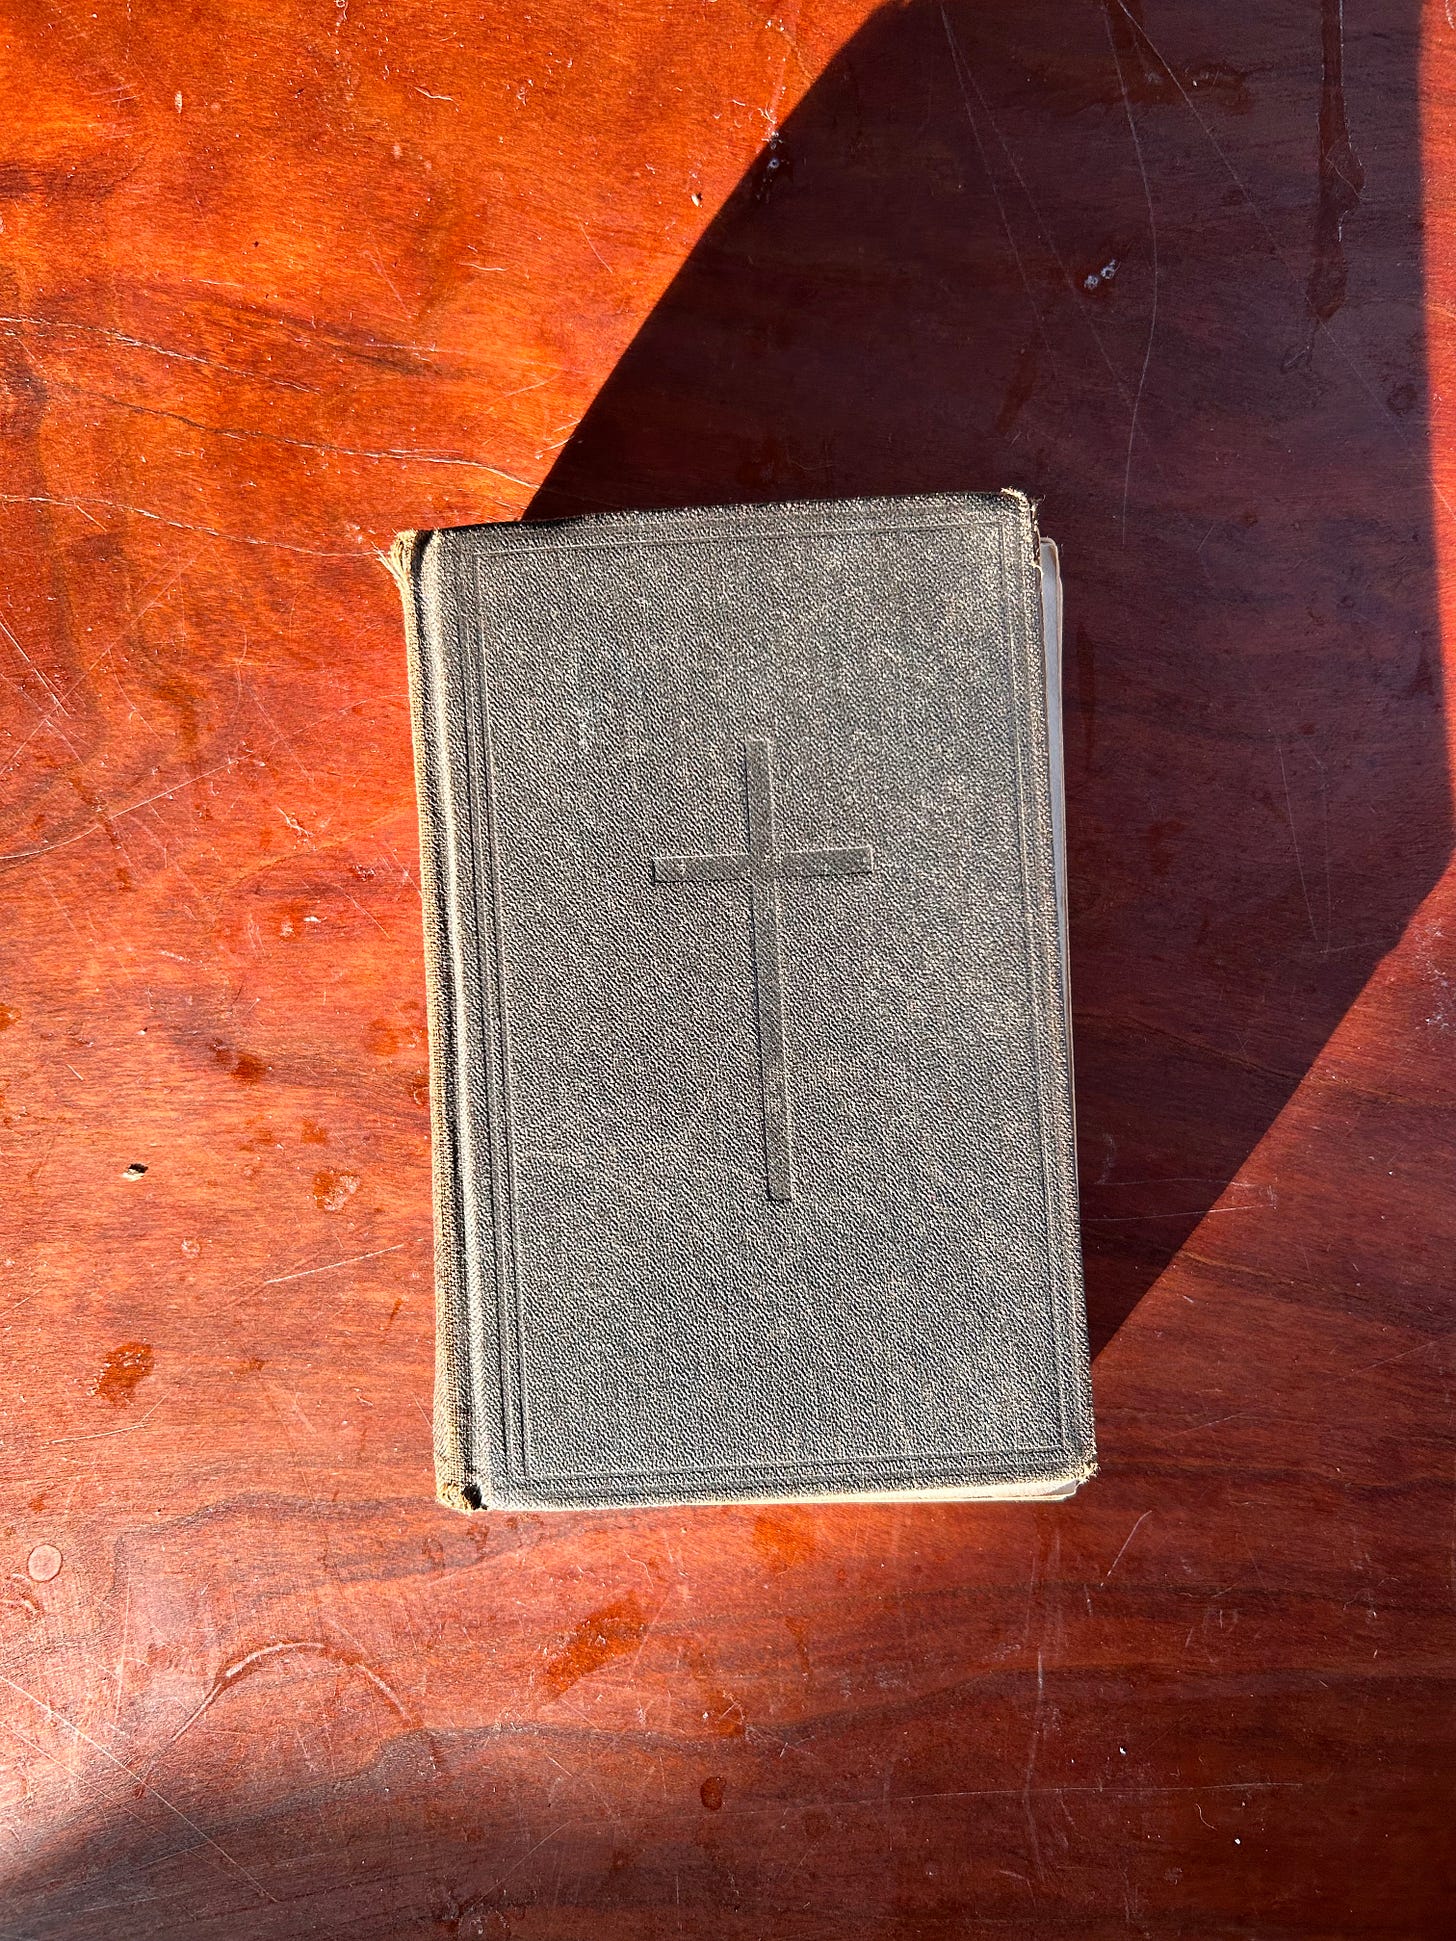 A prayer book, closed, featuring a cross on the front. Sitting on top of a wooden table.